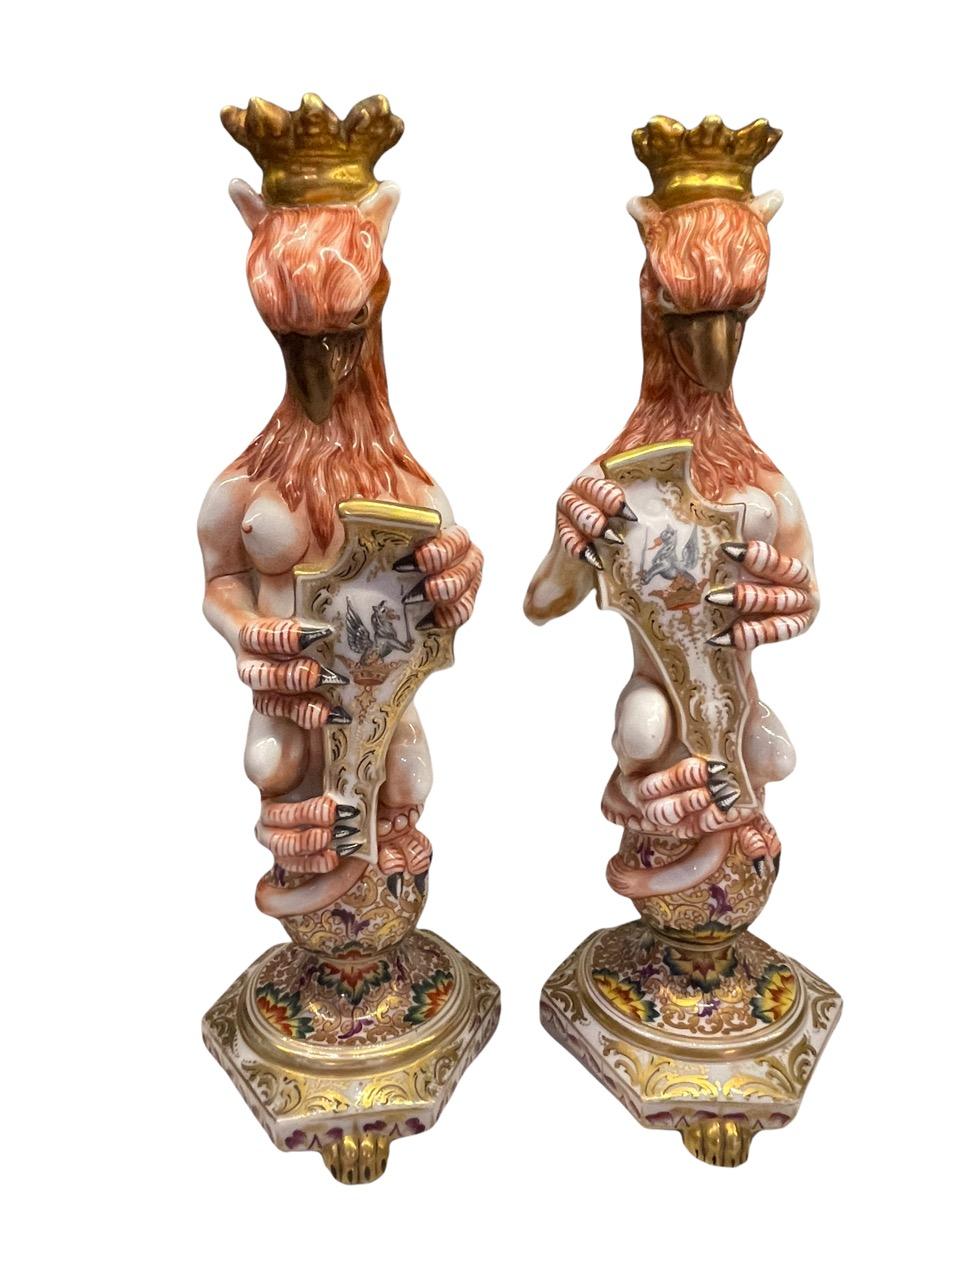 Capodimonte 19th Century Italian opposing pair of majolica crowned and winged griffon figures. Both are signed on the bottom base with the signature used from 1771 - 1834. Each featured grasping a shield with painted griffin motifs, and meticulously